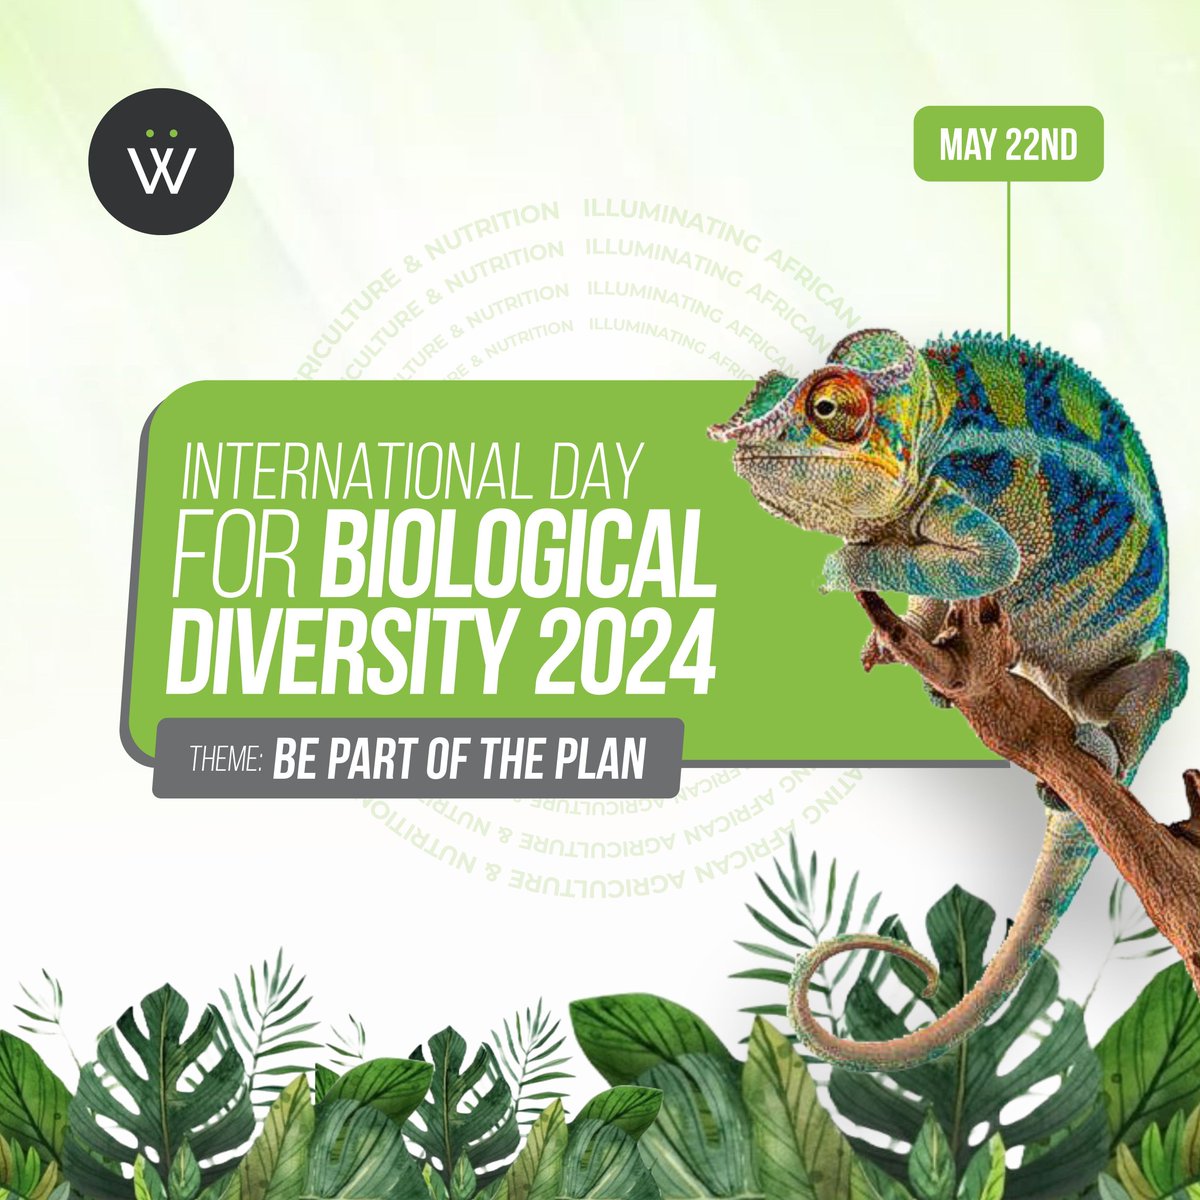 Happy #WorldBiologicalDiversity
Let us 'Be Part of the Plan' to protect our planet's biodiversity. Every small action counts: reduce, reuse, recycle, support conservation and make eco-friendly choices!

 #Wandieville #BePartOfThePlan #EcoFriendly #Biodiversity